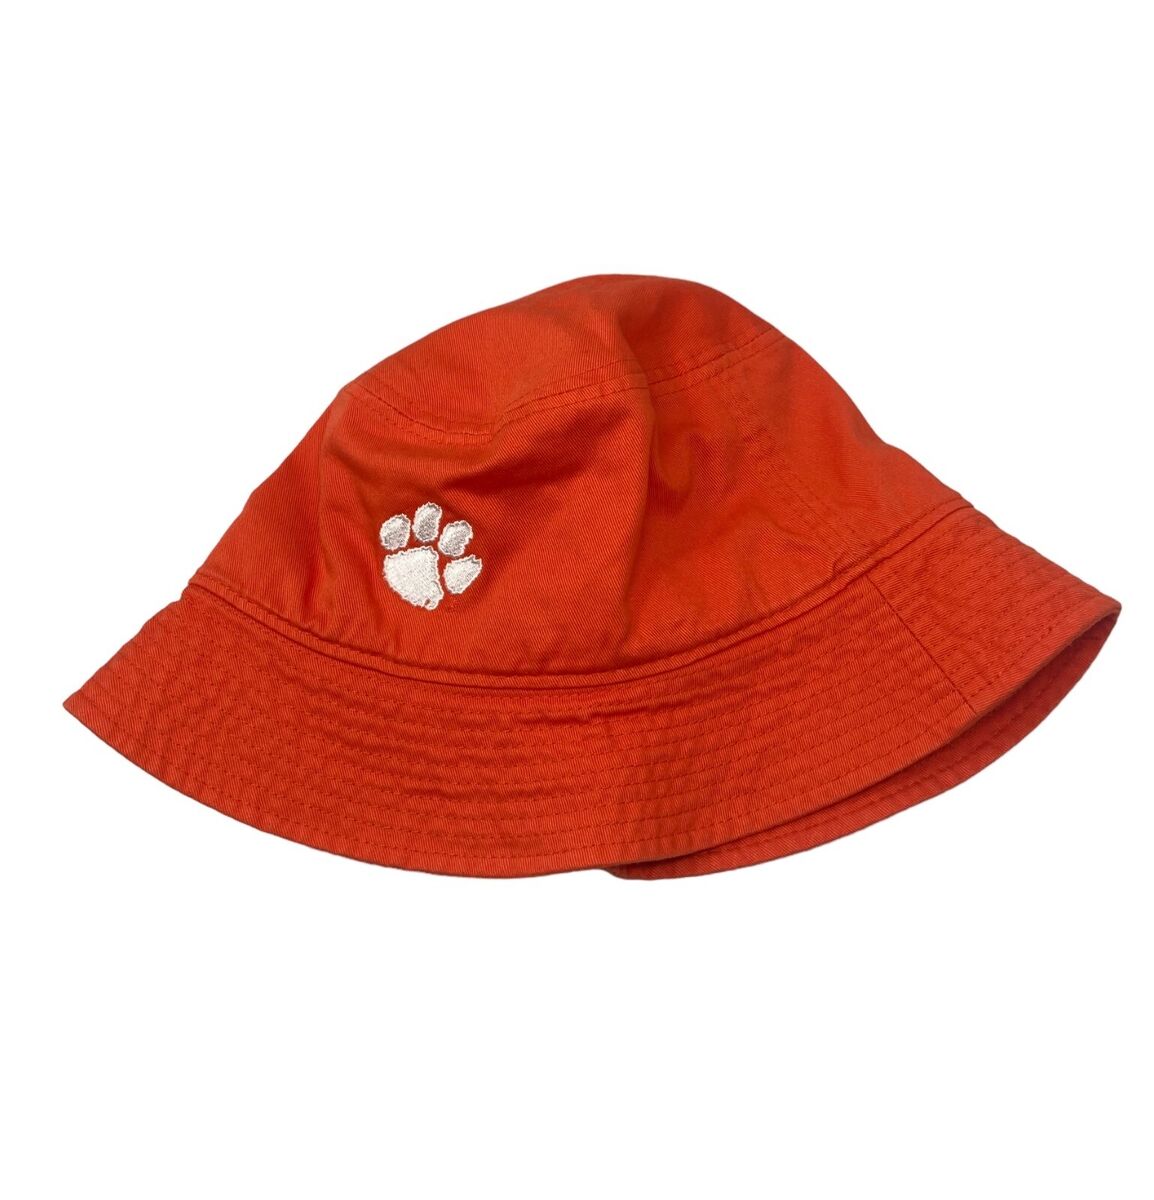 NWT New Clemson Tigers Nike Bucket Hat Cap Size Large/XL